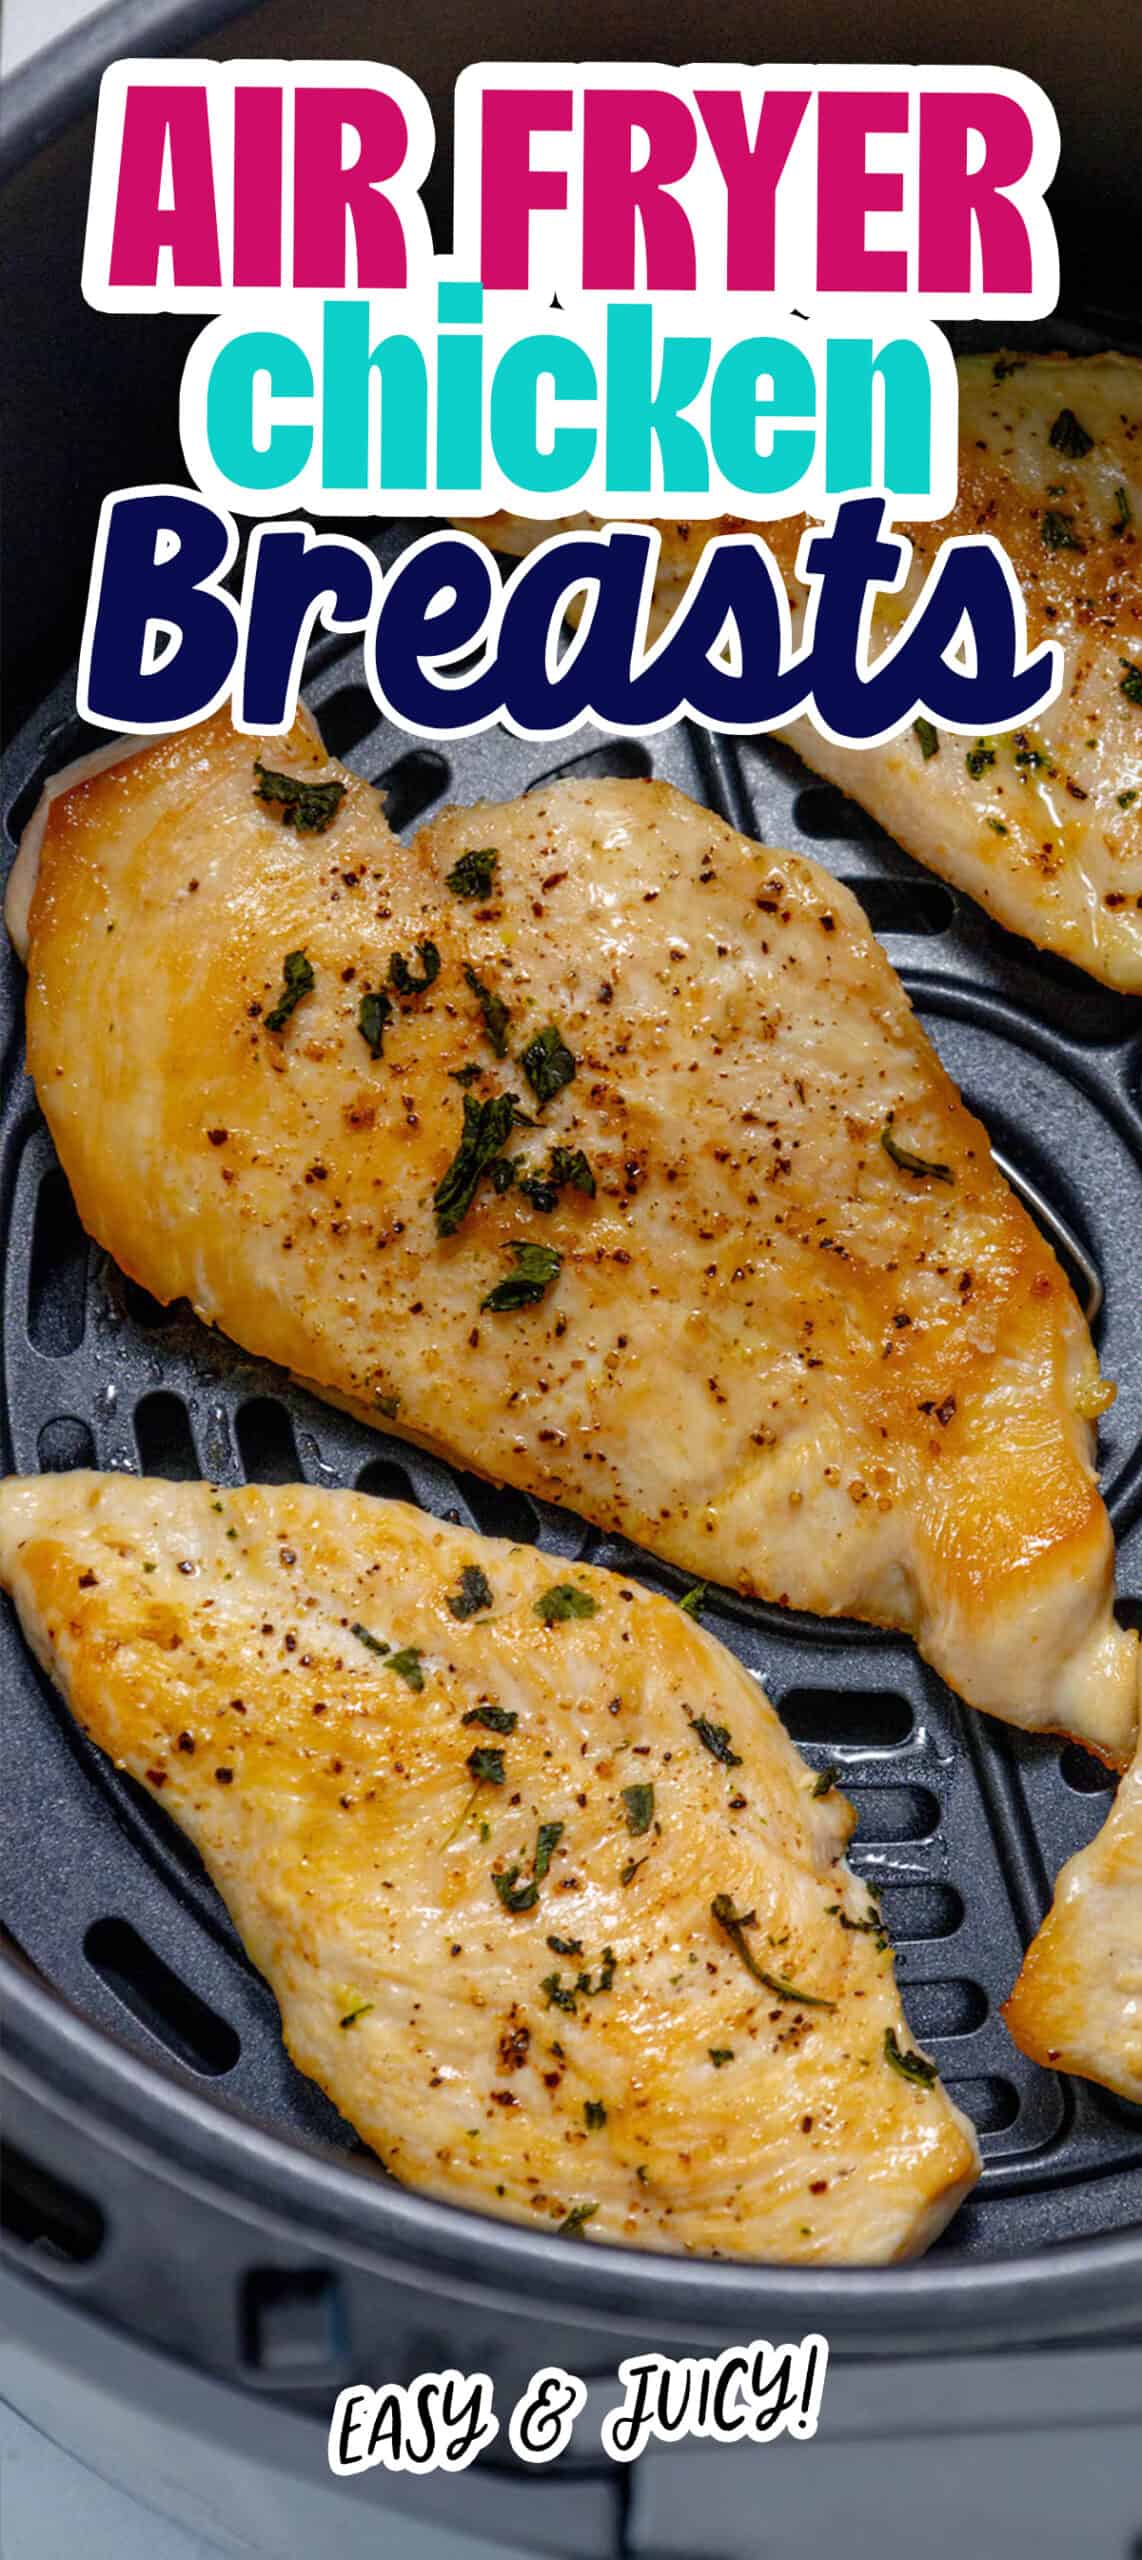 Keto air fried chicken breasts.